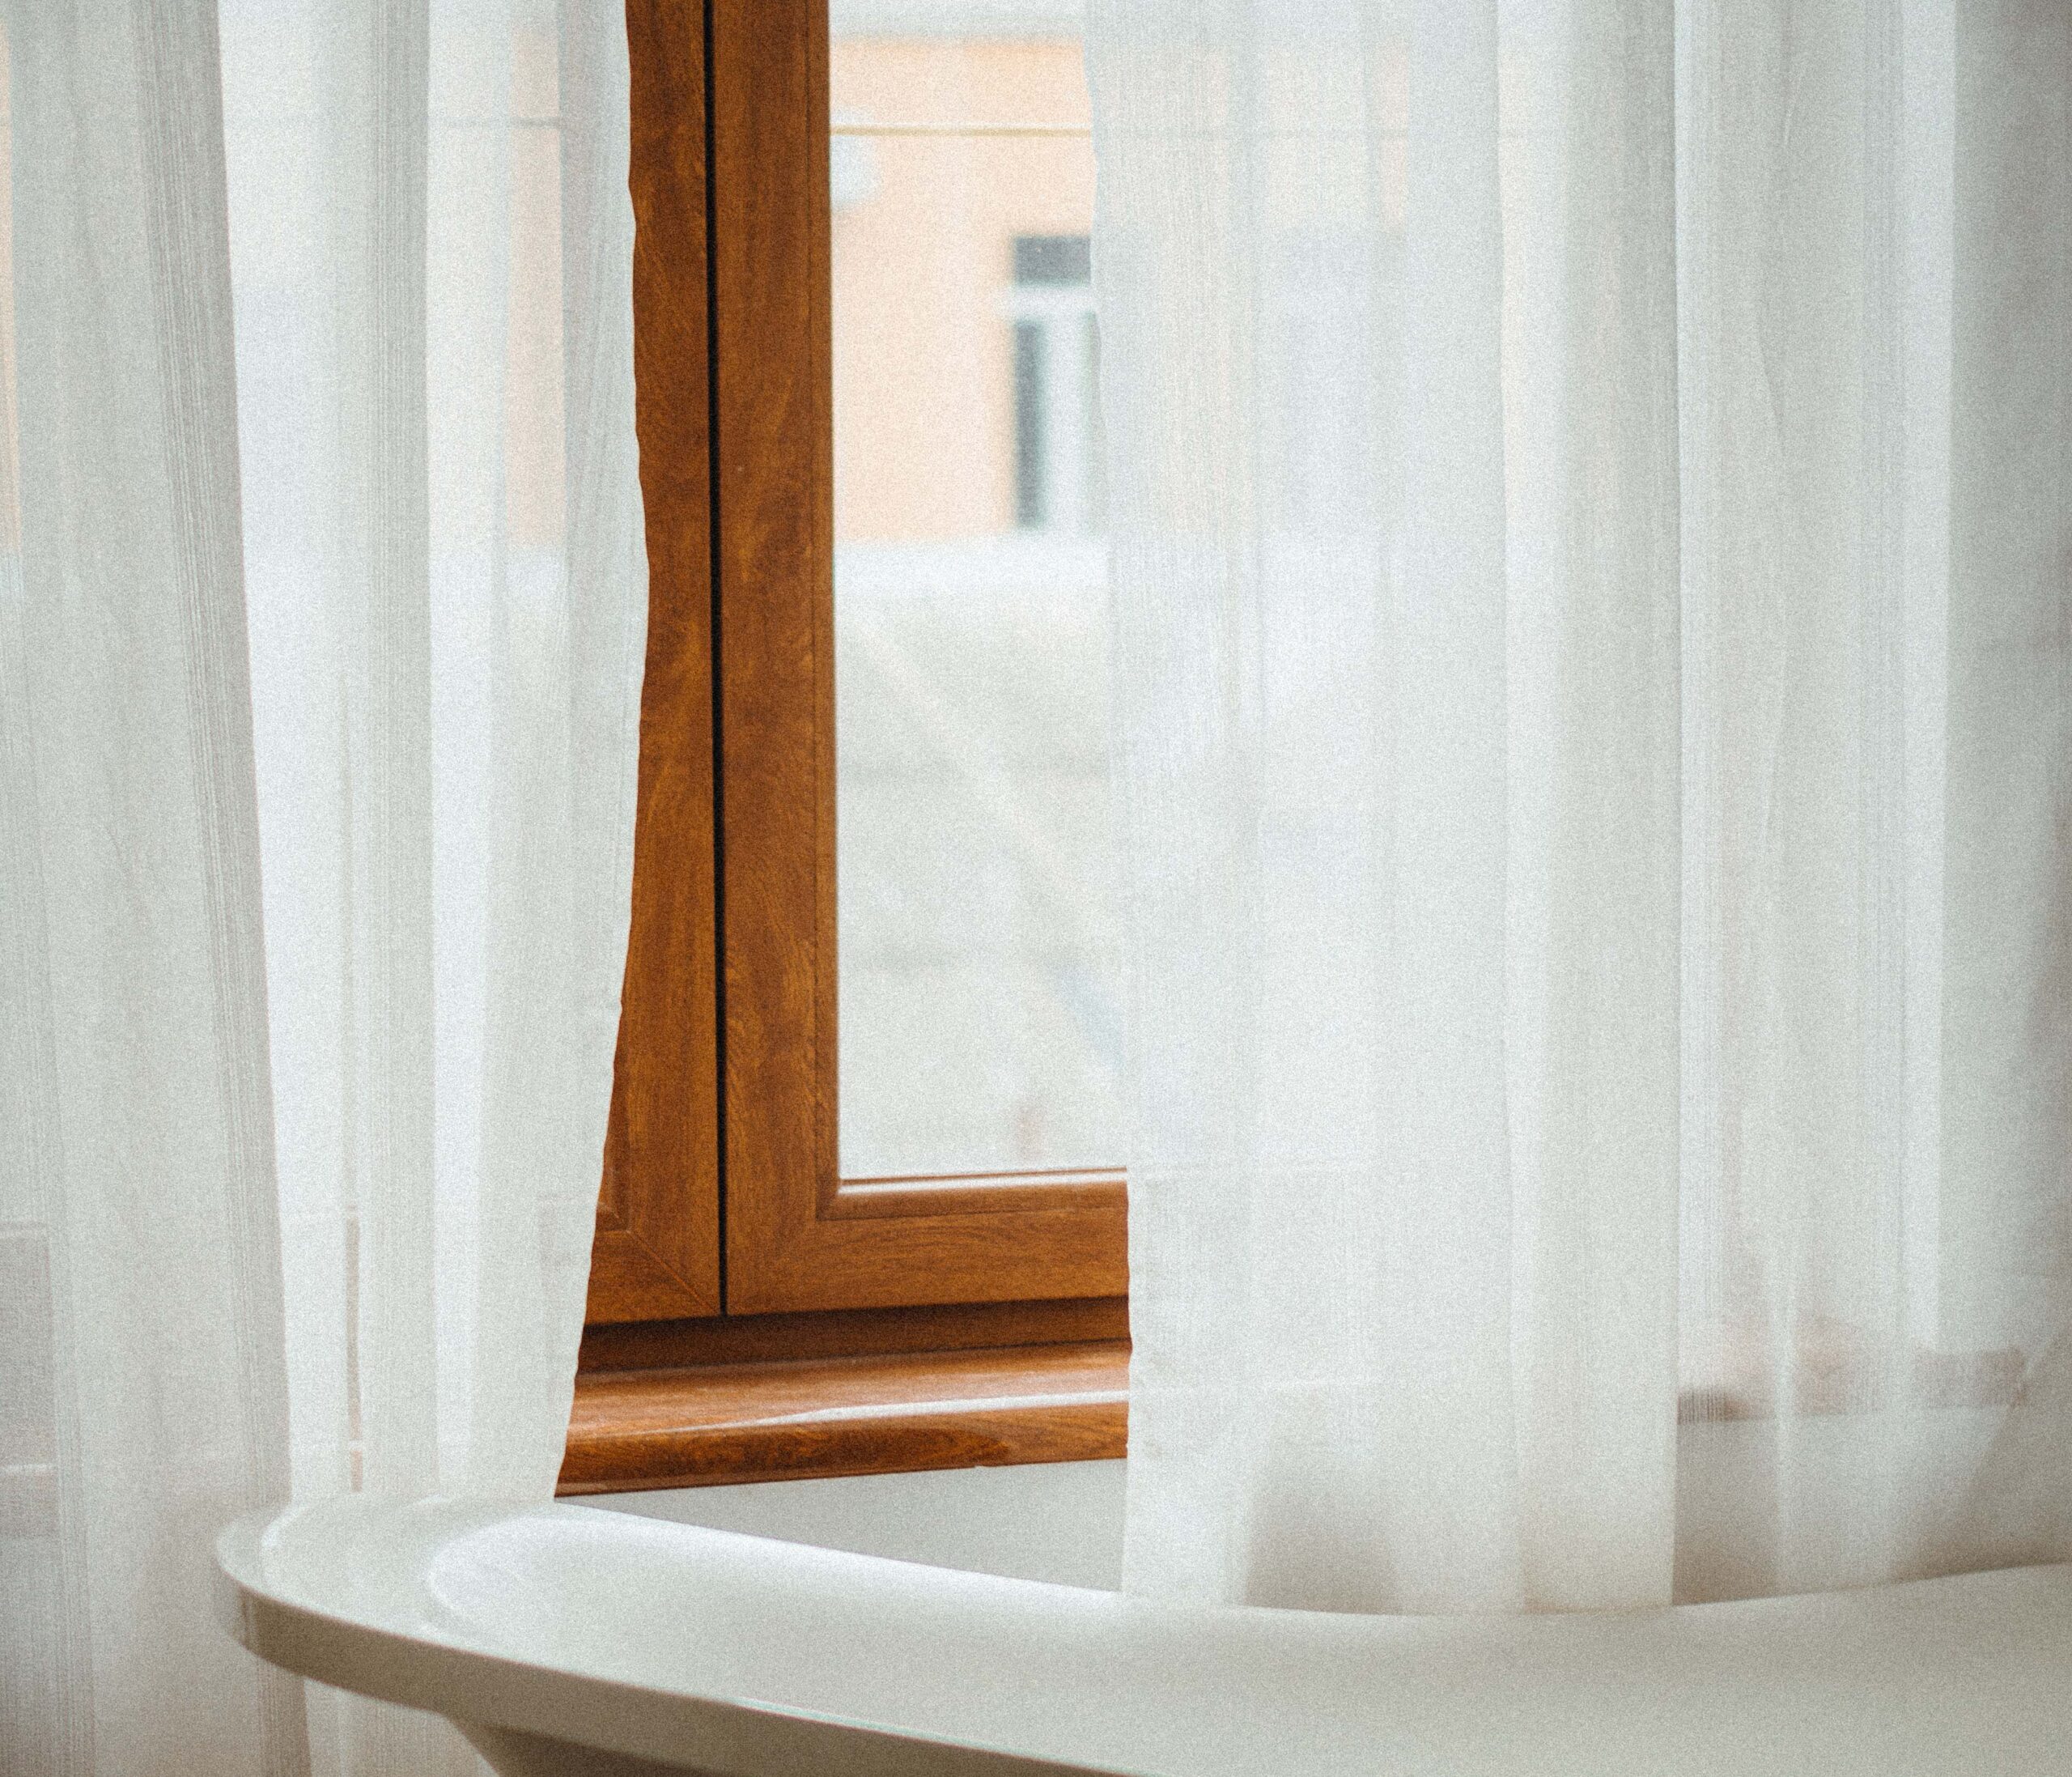 wood window and sheet curtains